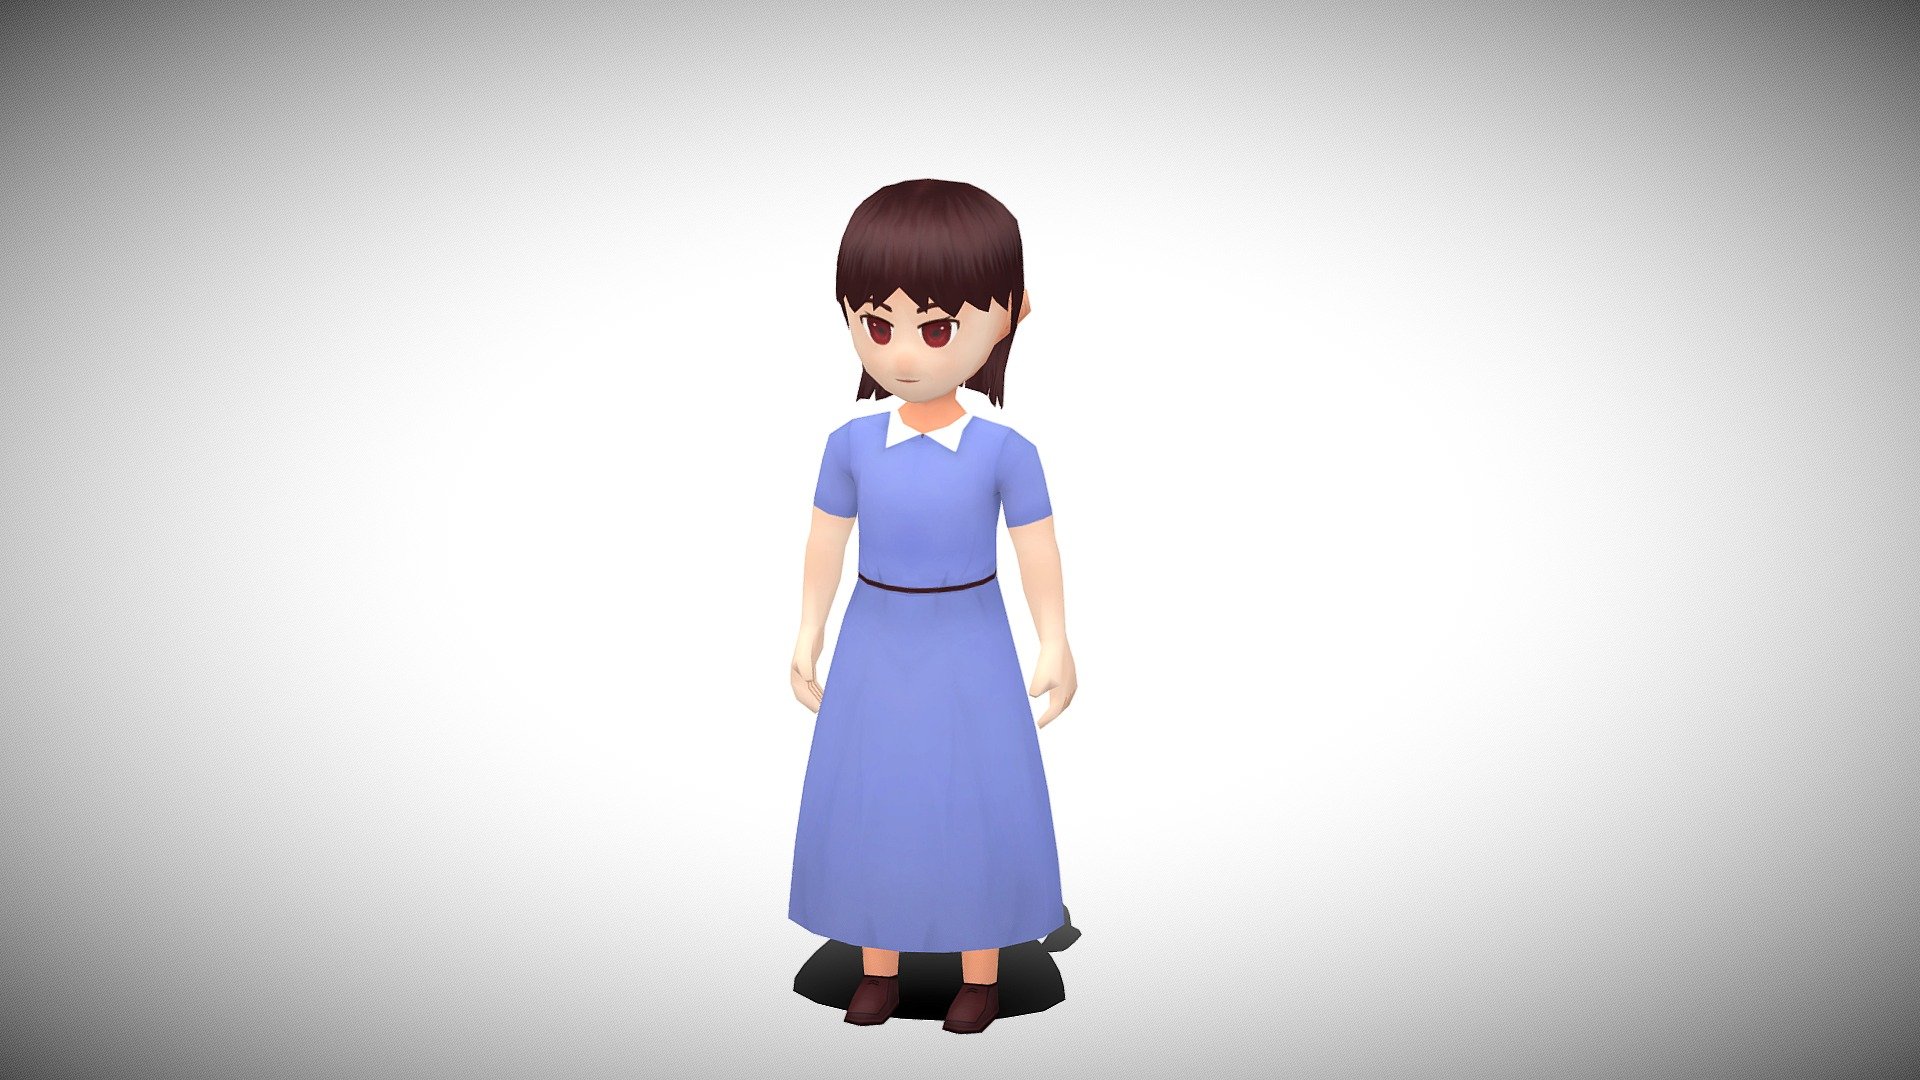 Highly optimized, rigged, and animated.

Polygon Count: 1004

Triangle Count: 1936



Color Variants:

• Peasant Girl Elsie Blue

• Peasant Girl Elsie Purple

• Peasant Girl Elsie Red

• Peasant Girl Elsie Yellow



Animations:

• Death

• Idle

• Idle2

• Run

• Talk

• Walk

• Waving



Removable Parts:

•Hairband

•Ribbon

(Object can be disabled in the hierarchy if needed for story/character upgrade)



Support

Your satisfaction is my top priority! 

If you need any support or have any suggestions, kindly send us an email, and we will get back to you immediately (usually within 24hr).

Please leave a review if you are satisfied with the product. It will help us create more for you :) - Stylized NPC - Peasant Girl Elsie - Buy Royalty Free 3D model by Winged Boots Studio (@wingedbootsstudio) 3d model